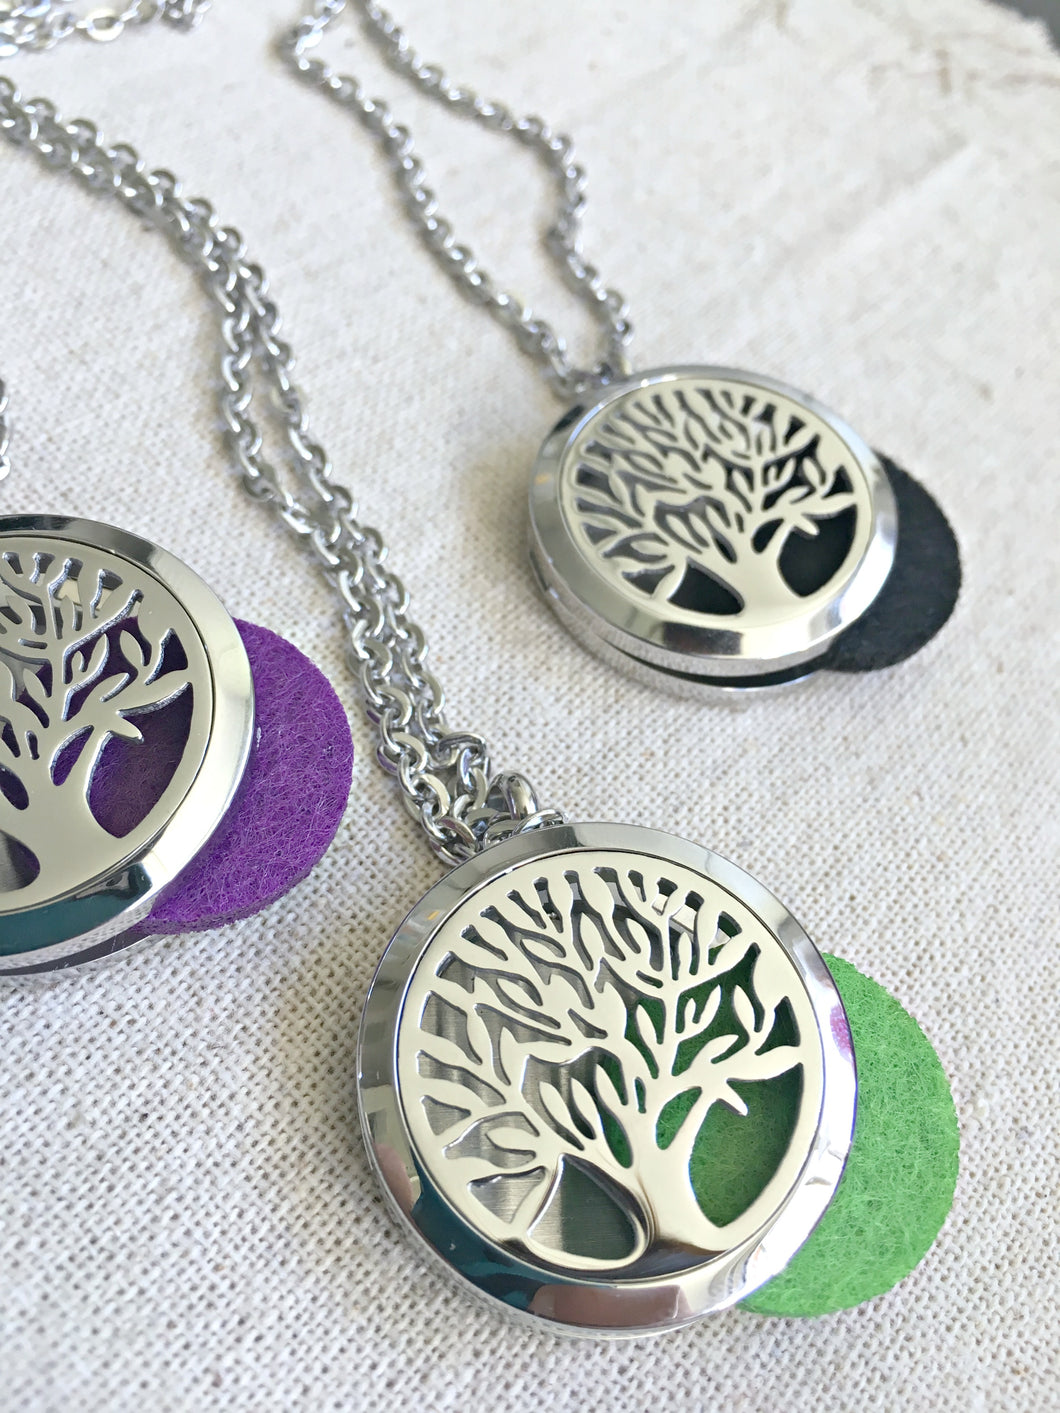 Tree of Life Necklace, Diffuser Locket Necklace, Stainless Steel Essential Oil Necklace, Essential Oil Diffuser, Self Care Gifts